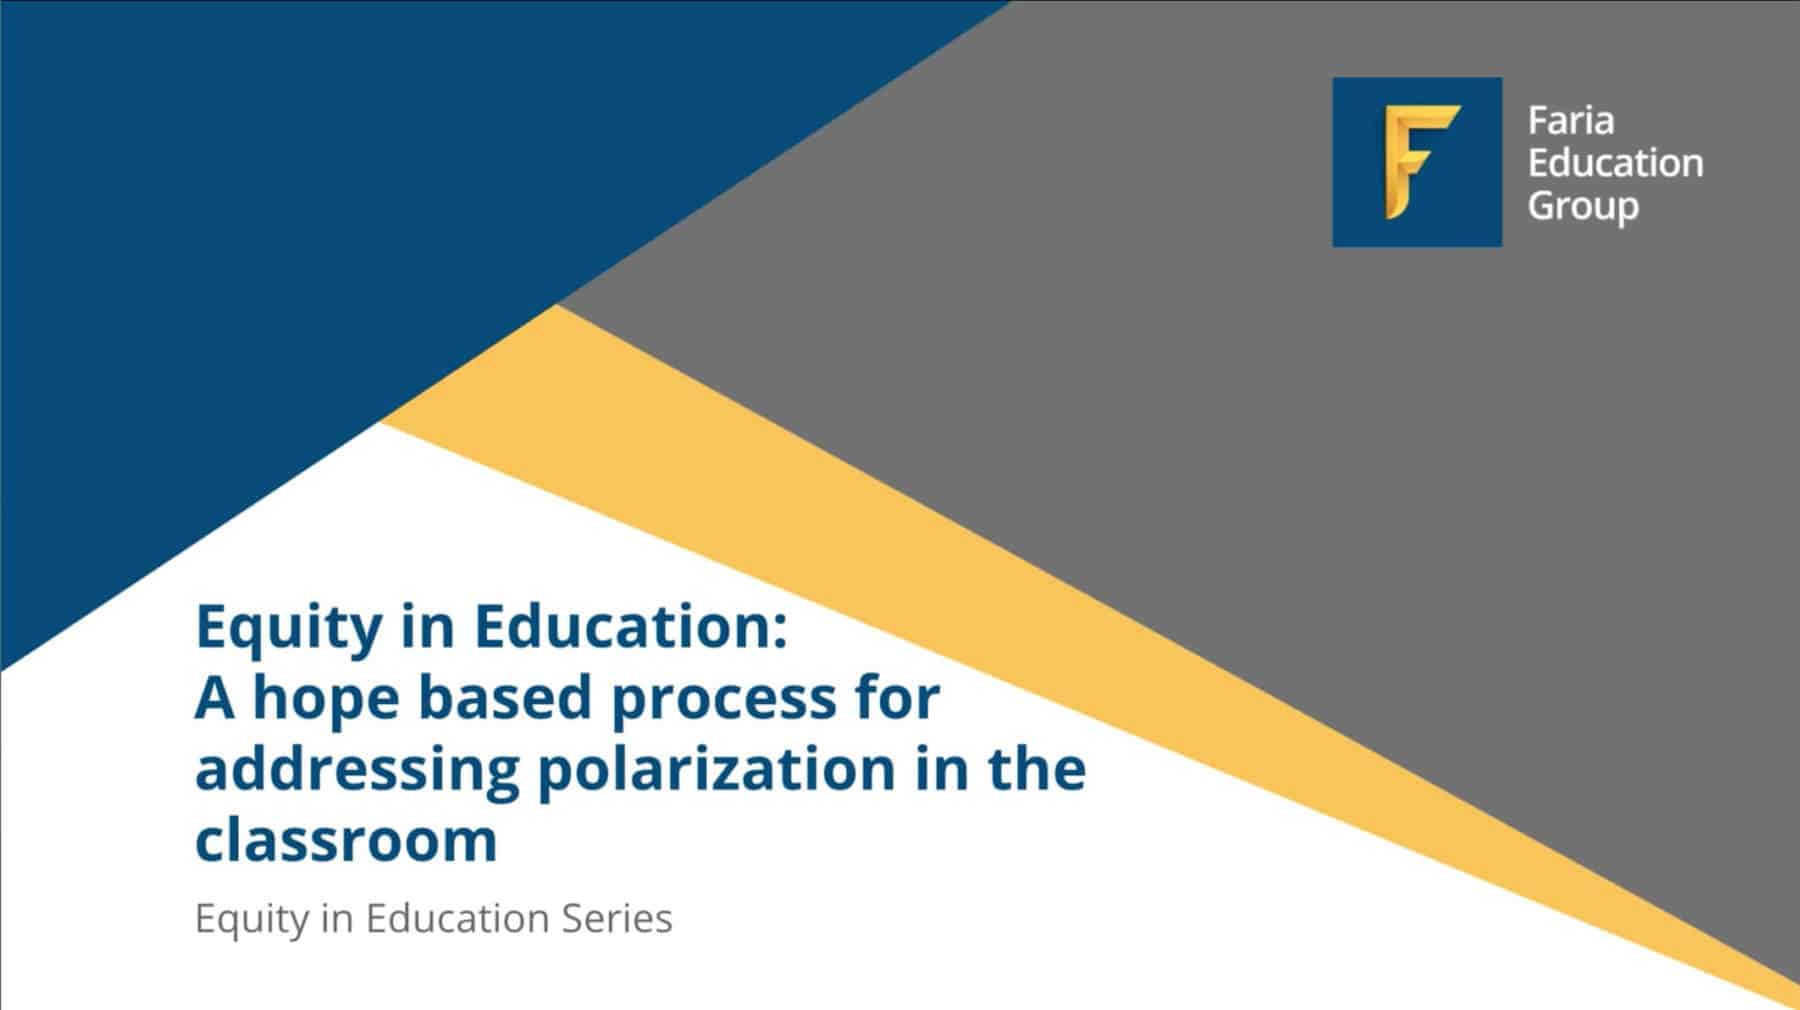 Equity in Education: A hope based process for addressing polarization in the classroom